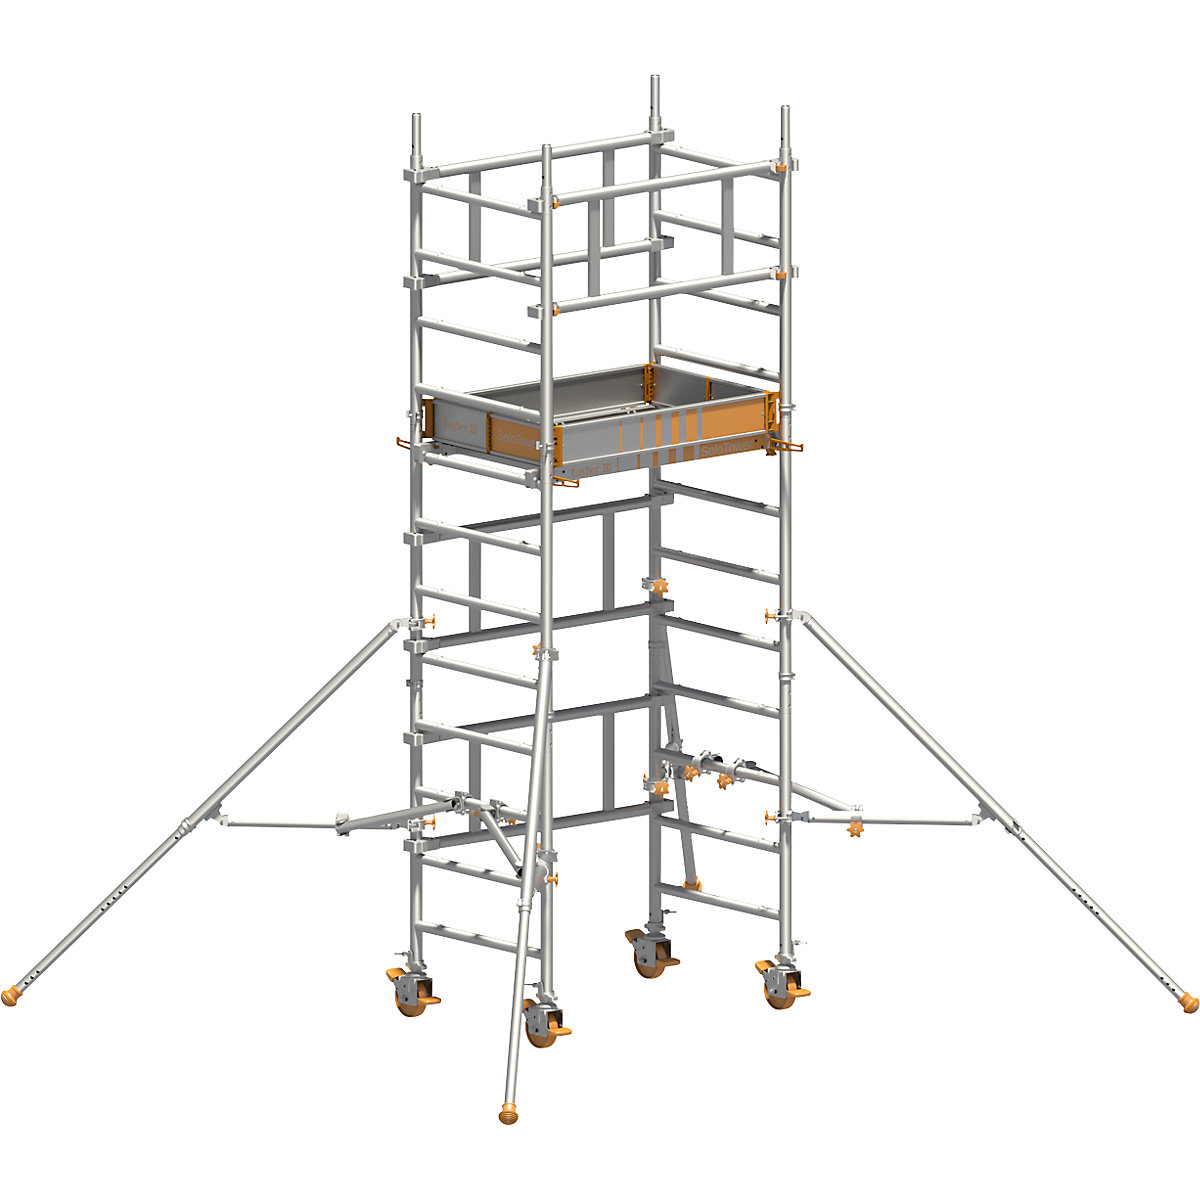 SoloTower one-person mobile access tower - Layher